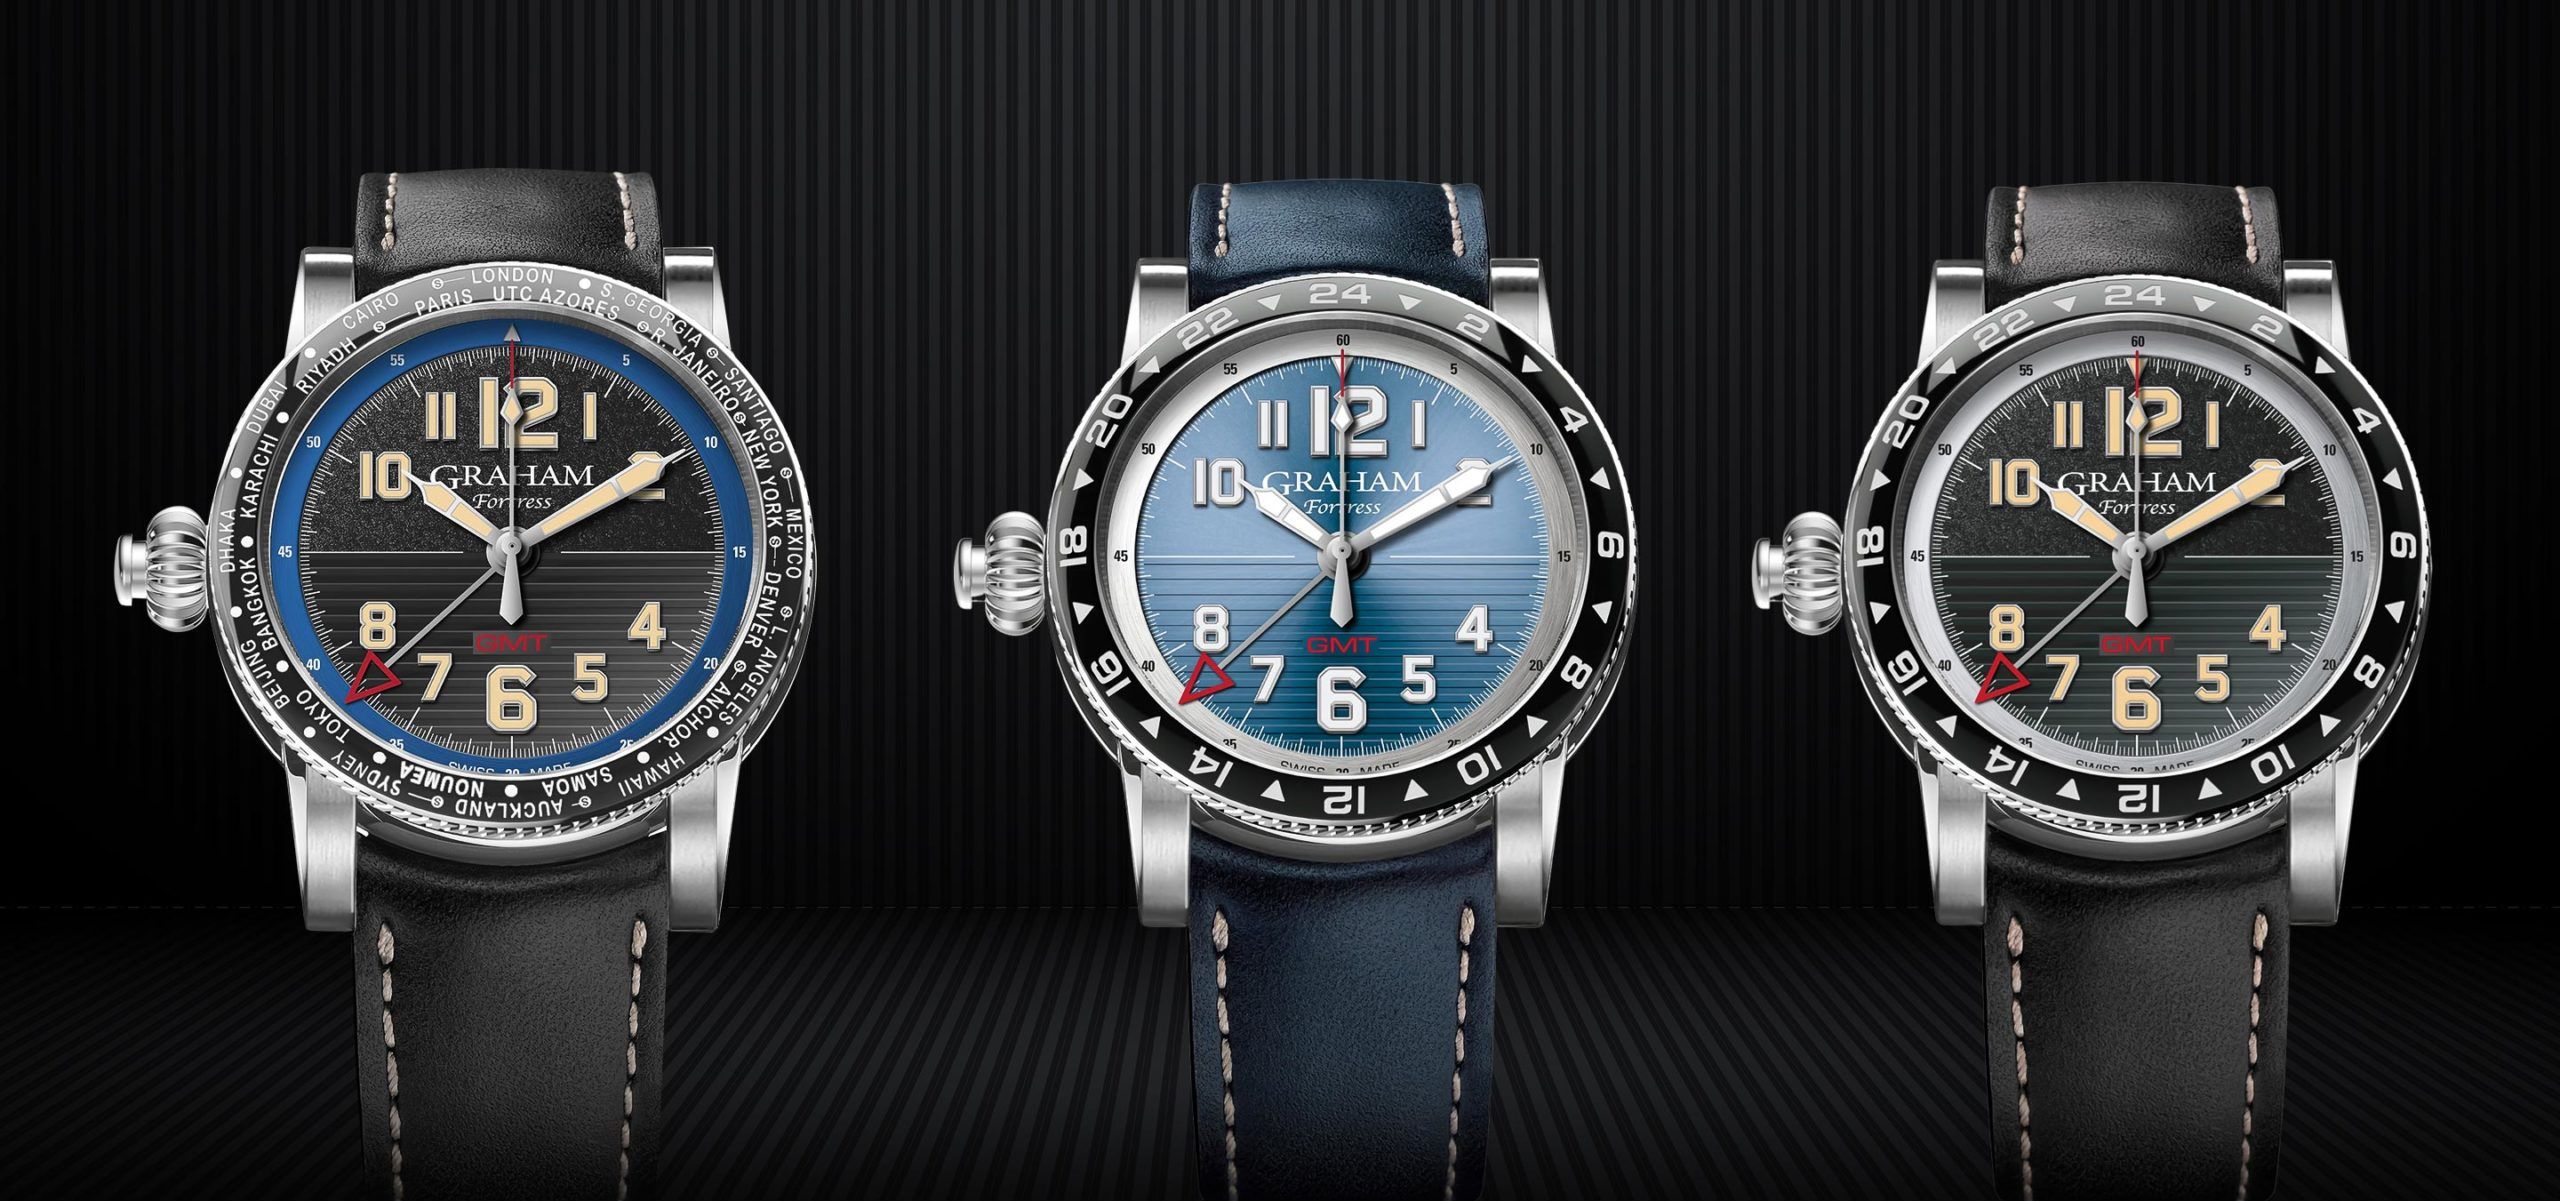 The Fortress Goes Worldwide: Graham's Fortress GMT And WorldTimer